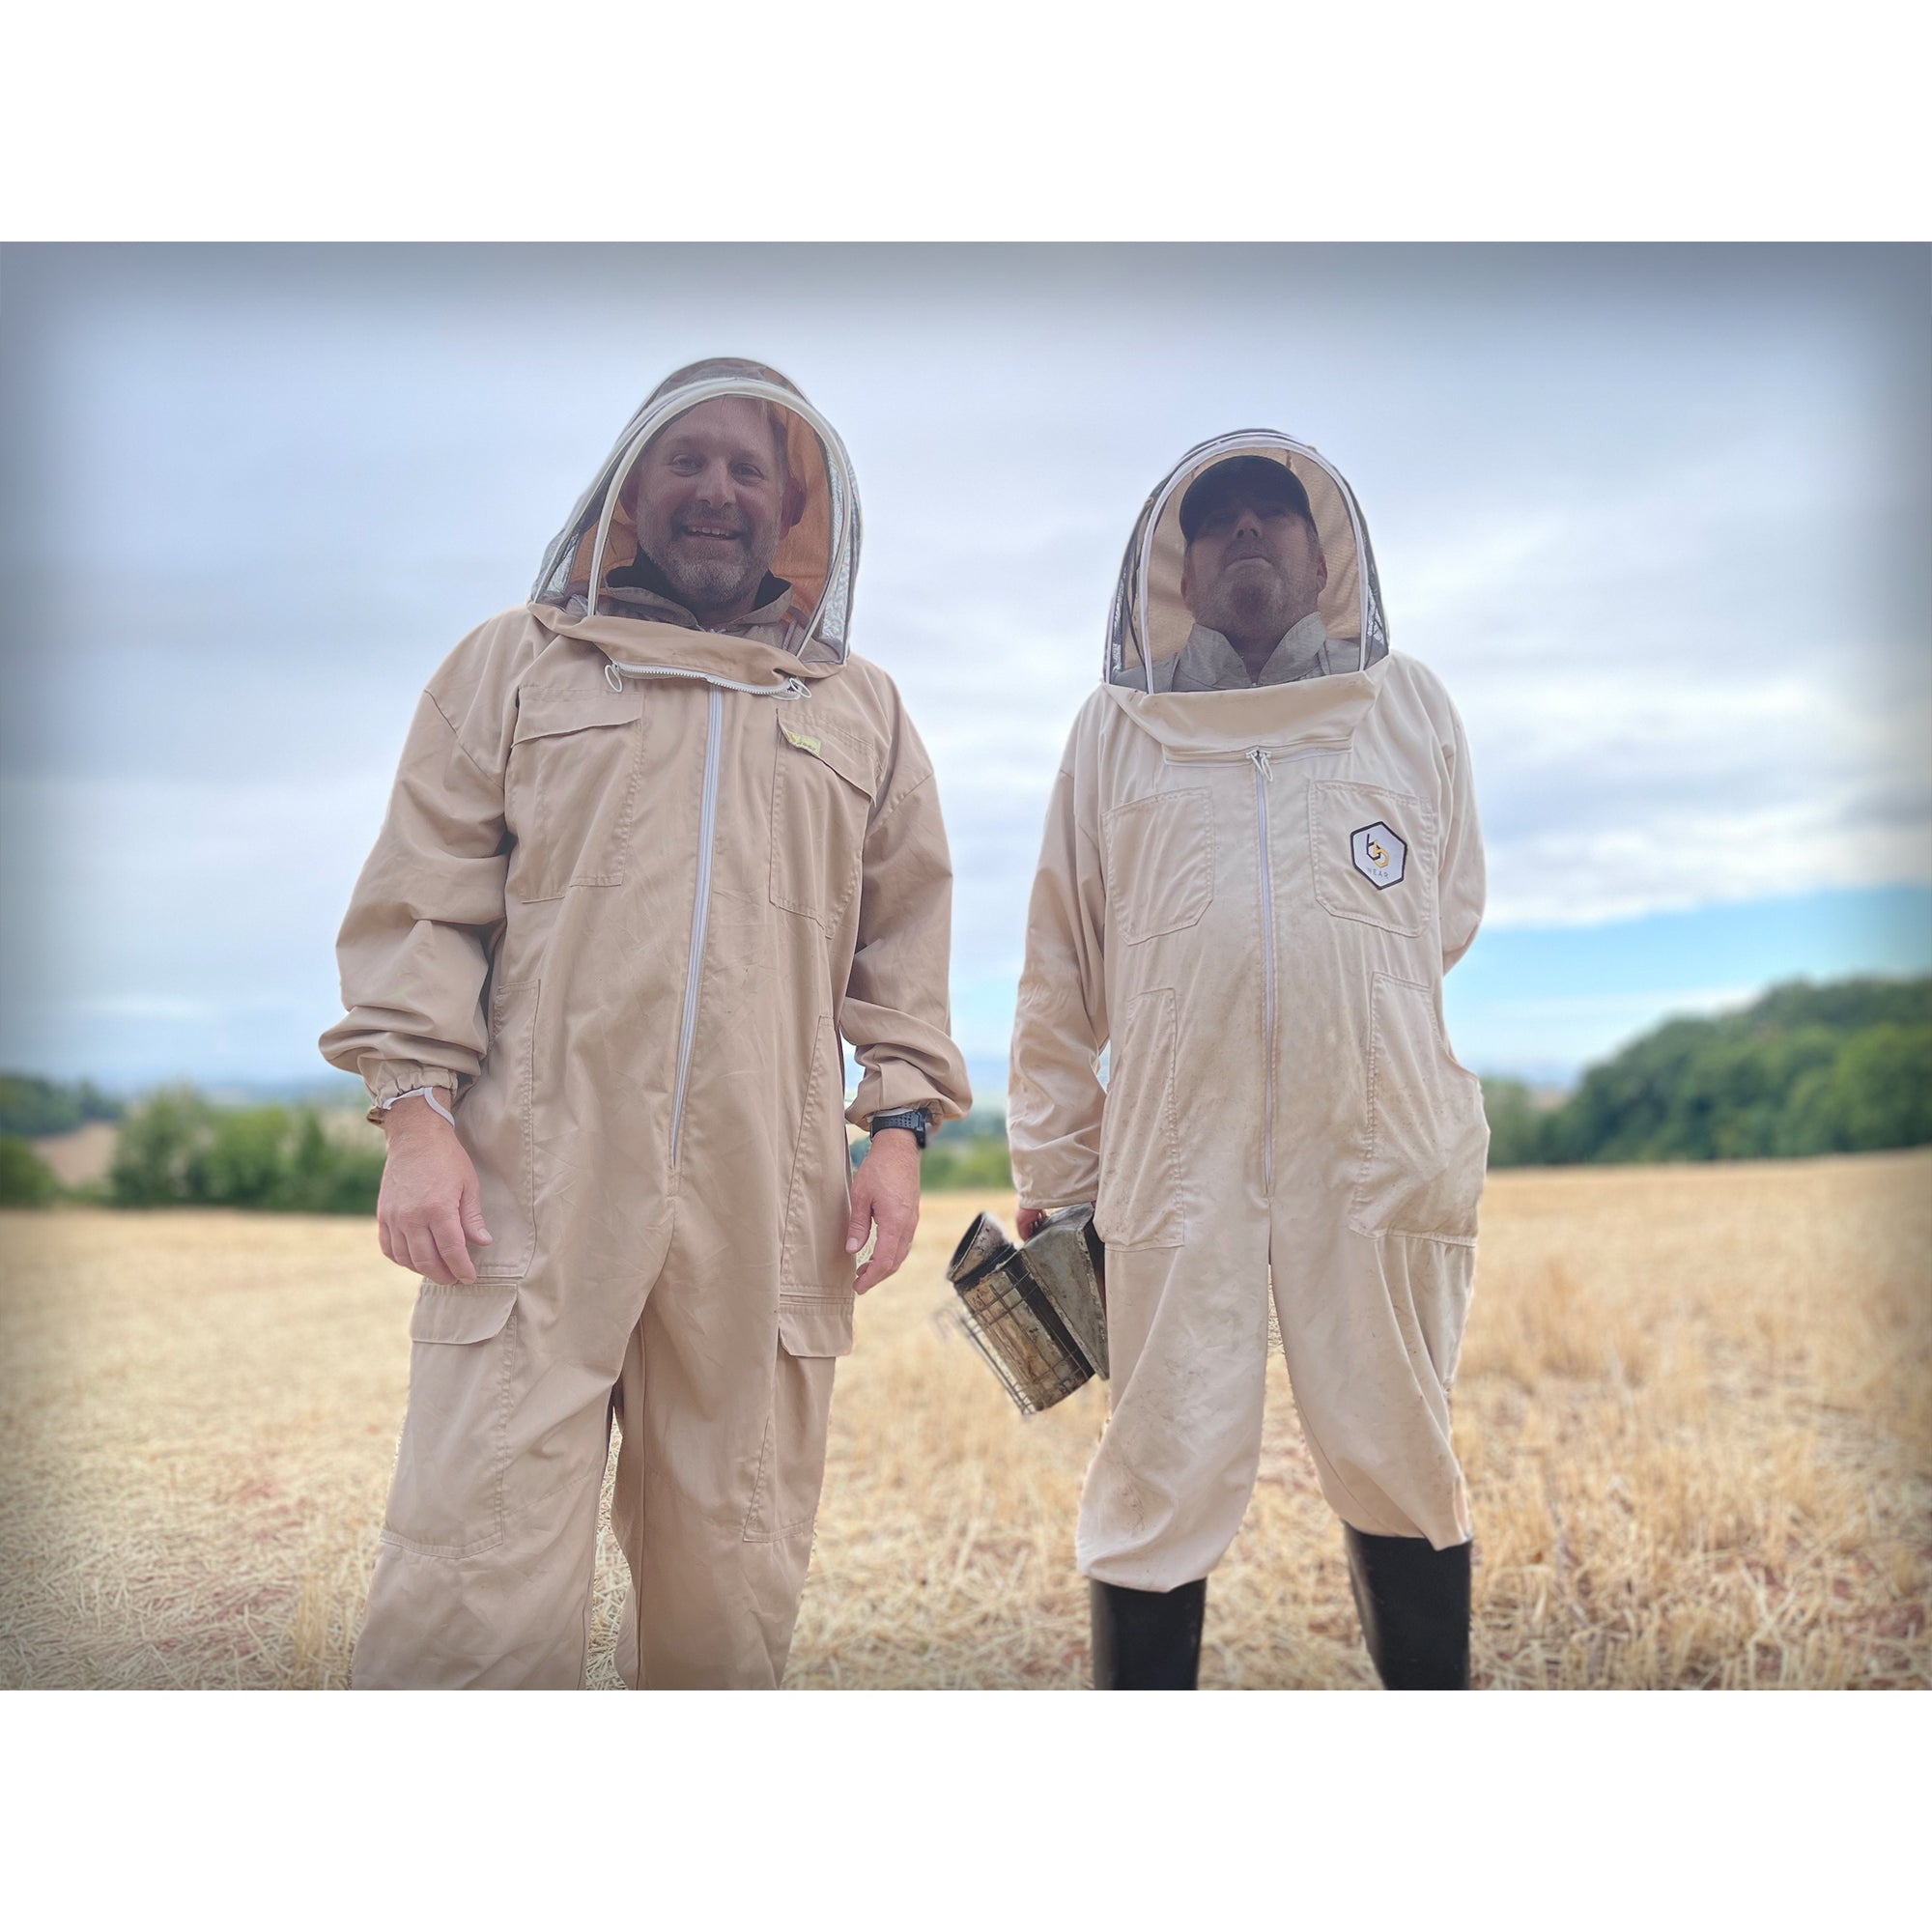 Simon with Neil the Beekeeper 